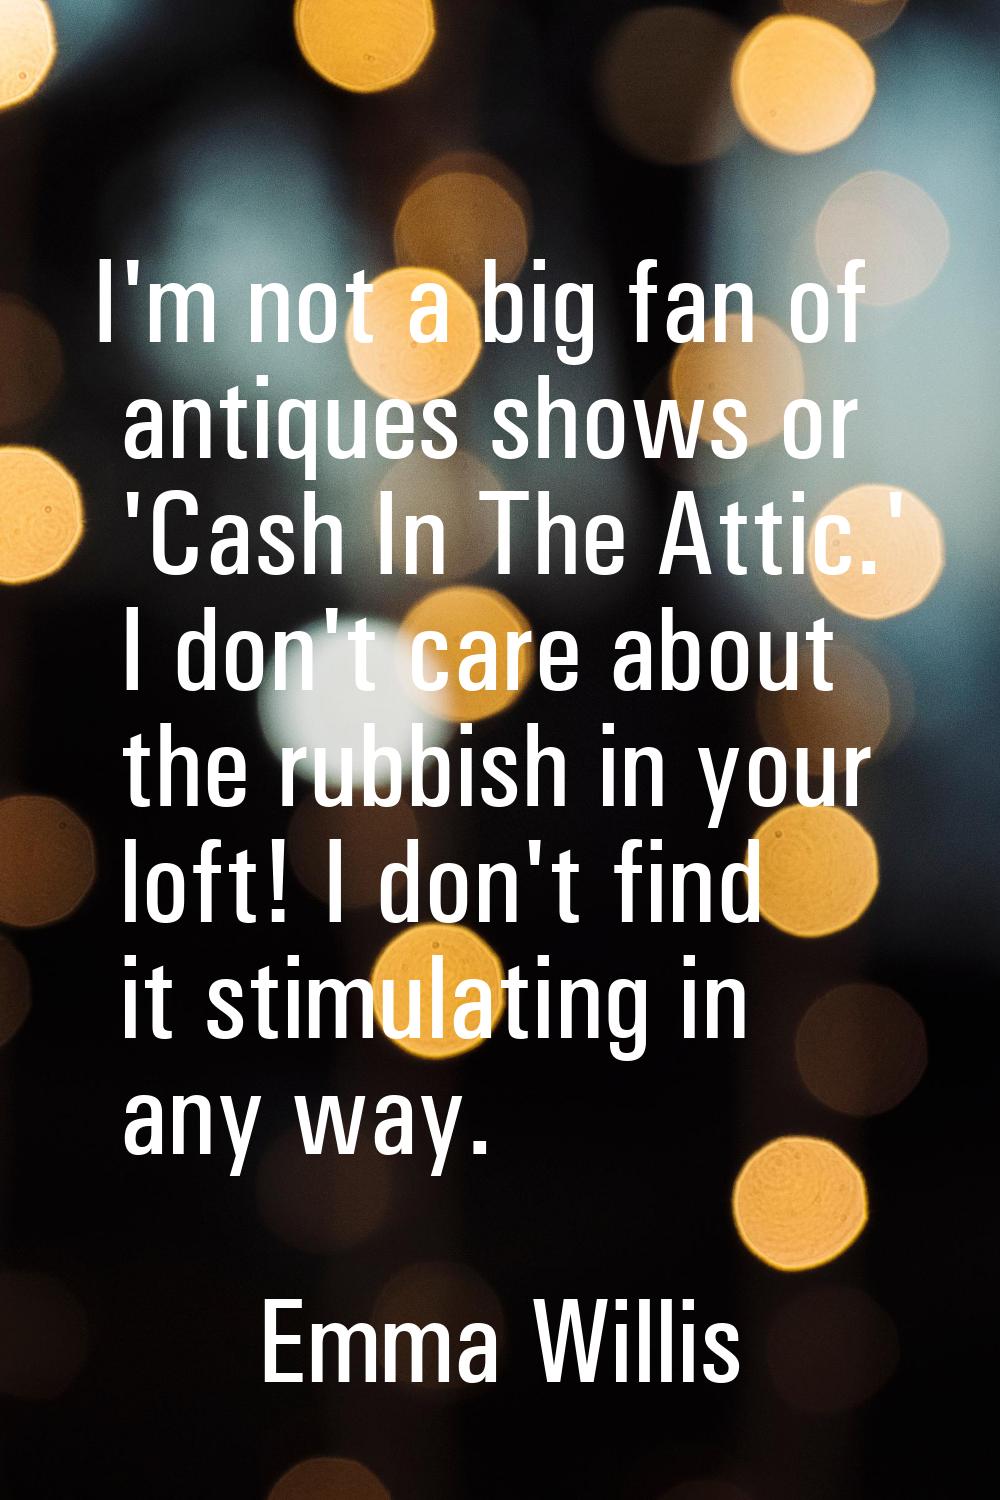 I'm not a big fan of antiques shows or 'Cash In The Attic.' I don't care about the rubbish in your 